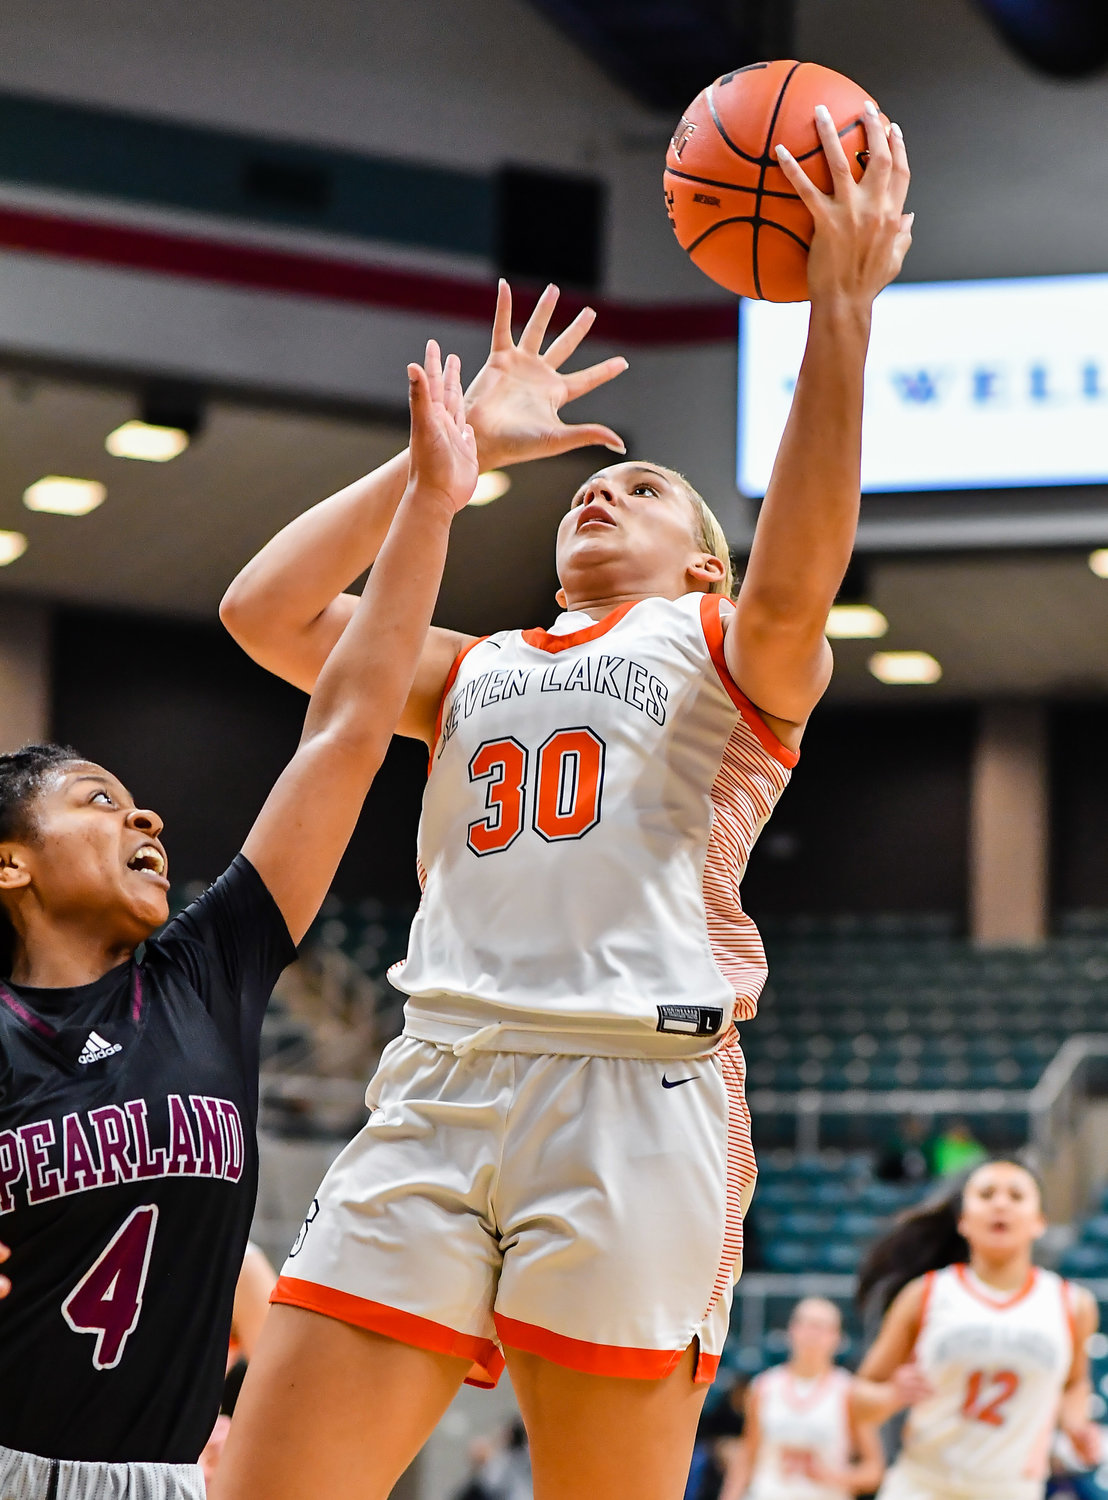 Katy Tx. Feb 25, 2022:  Seven Lakes Justice Carlton #30 drives to the basket guarded by Pearlands Paige Bonner #4 during the Regional SemiFinal playoff game, Seven Lakes vs Pearland at the Merrell Center. (Photo by Mark Goodman / Katy Times)